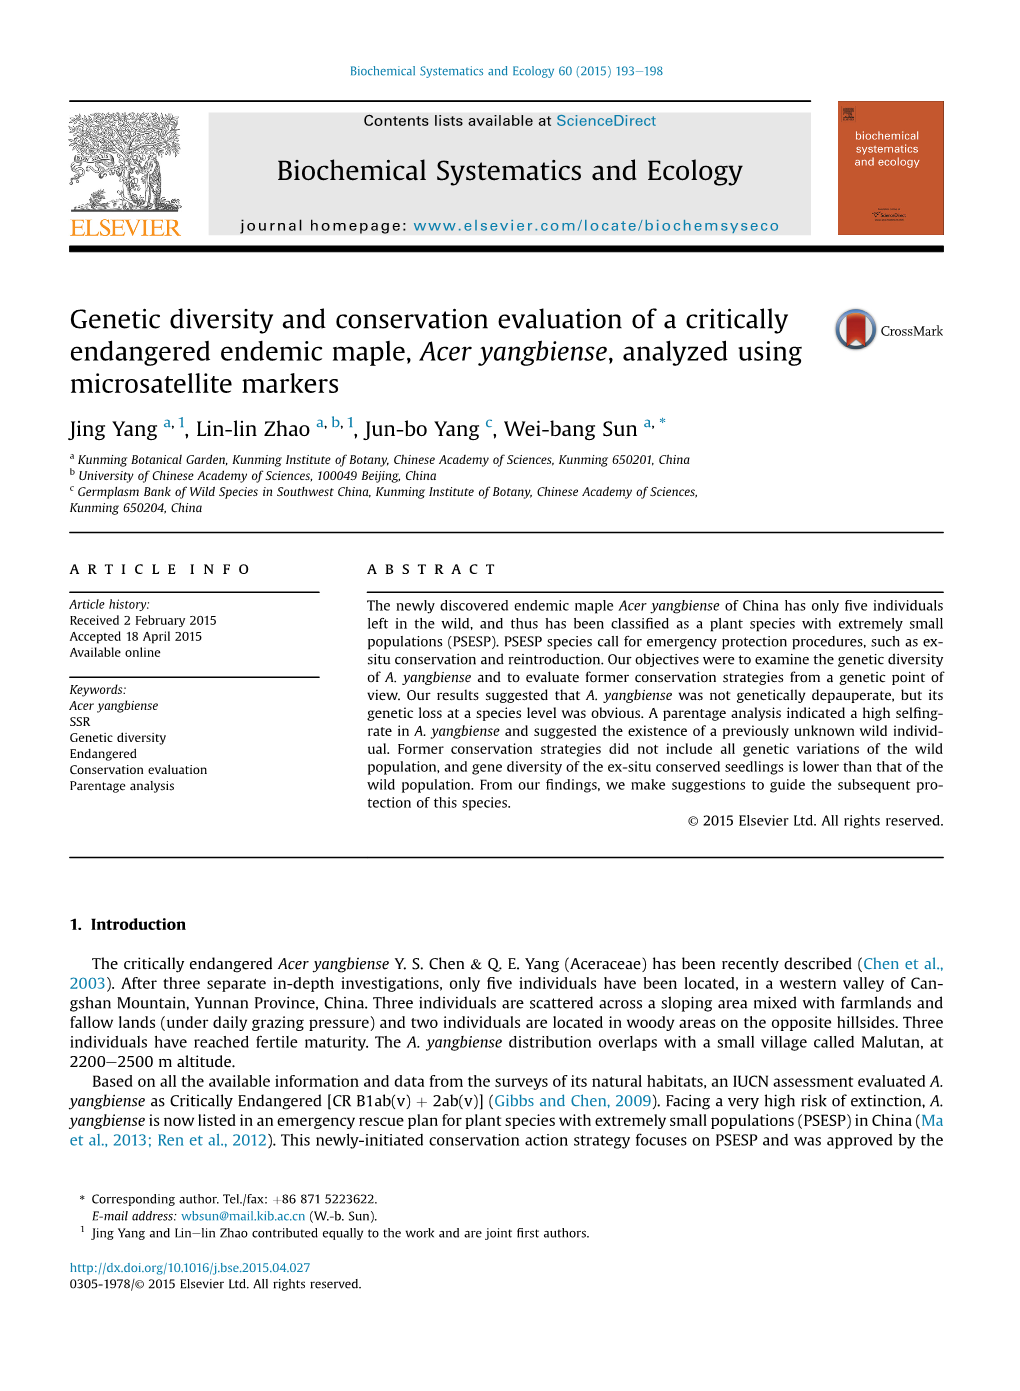 Genetic Diversity and Conservation Evaluation of a Critically Endangered Endemic Maple, Acer Yangbiense, Analyzed Using Microsatellite Markers